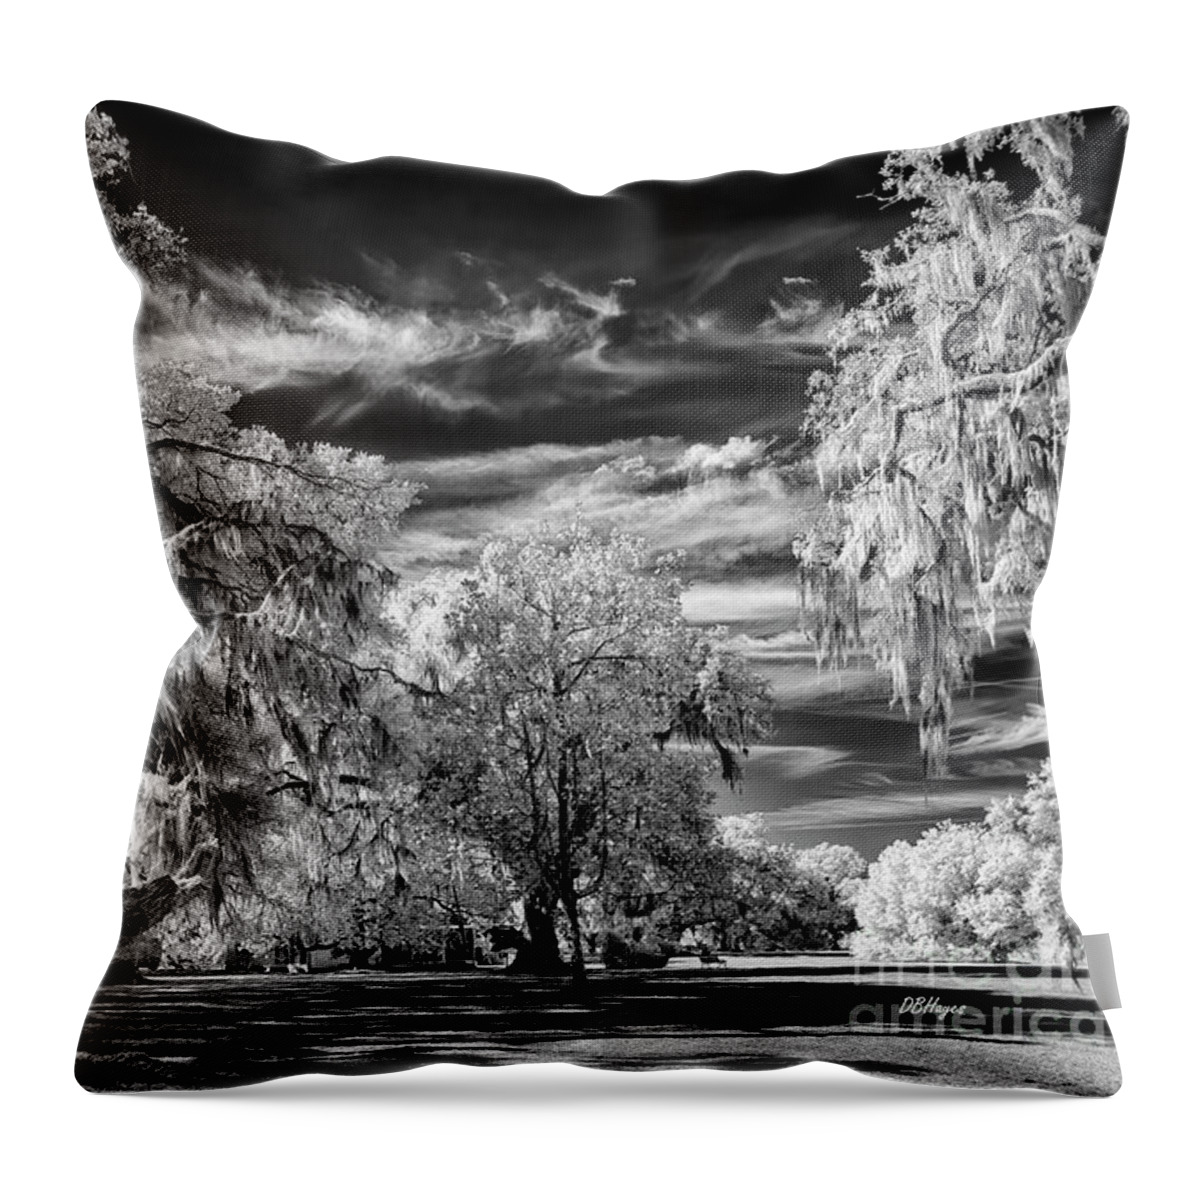 Black & White Throw Pillow featuring the photograph Southern Charm by DBHayes by DB Hayes